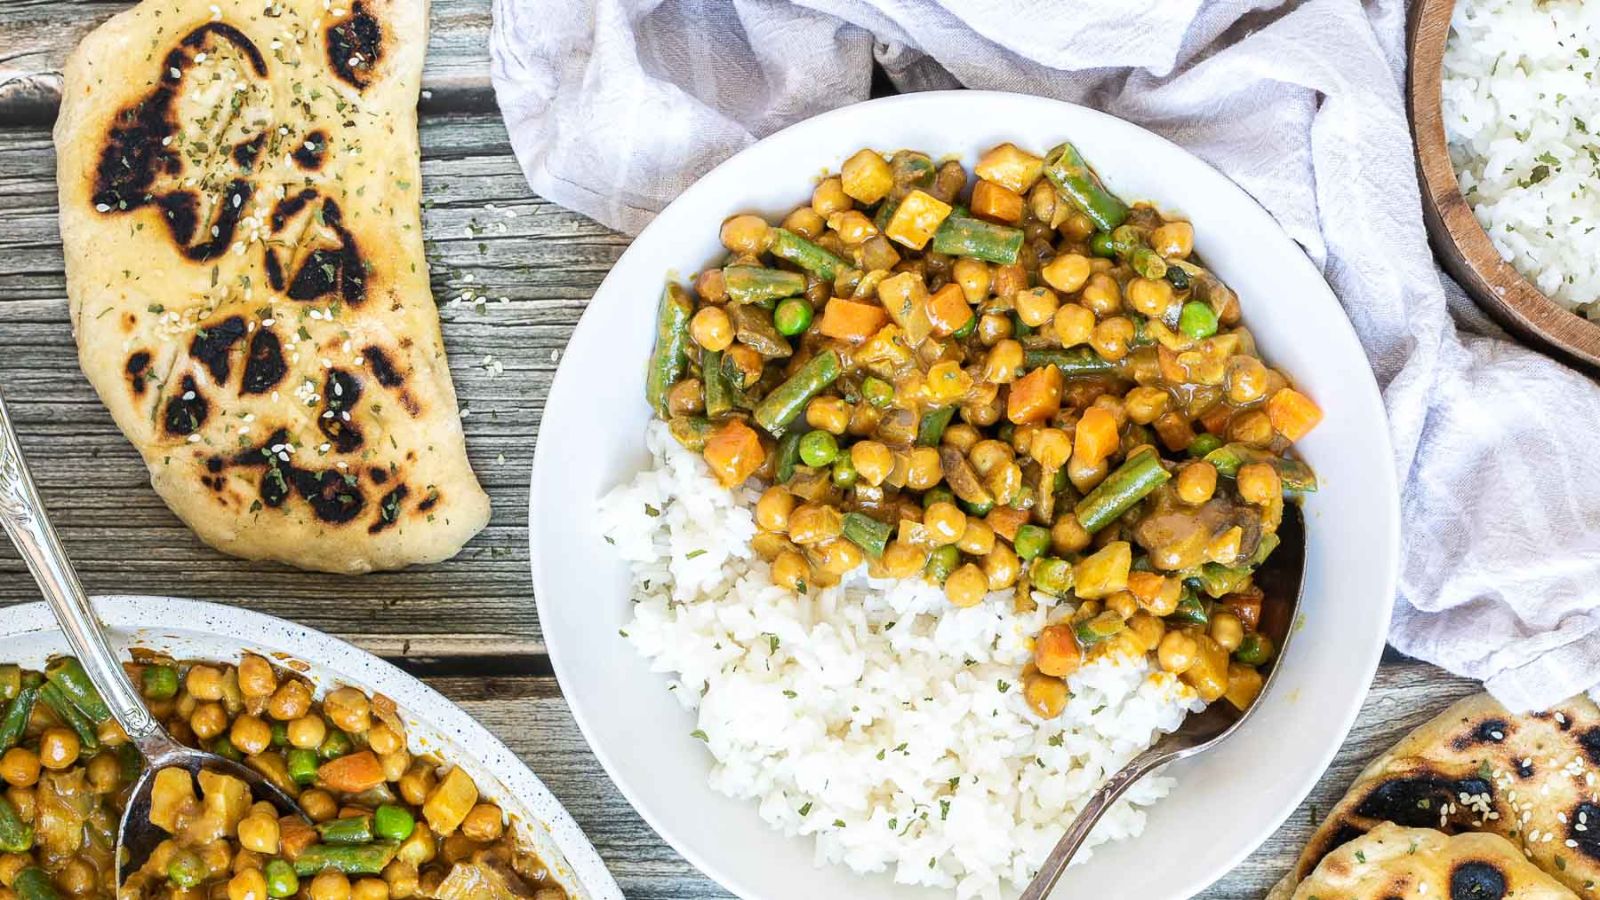 <p>This vegetable korma recipe is a quick and easy way to make a flavorful Indian dish that is loaded with vegetables and protein-rich chickpeas. With its creamy and aromatic sauce, it is a perfect choice for a healthy and delicious dinner that everyone will love.</p> <p><strong>Recipe: <a href="https://mypureplants.com/vegetable-korma/">vegetable korma</a></strong></p>